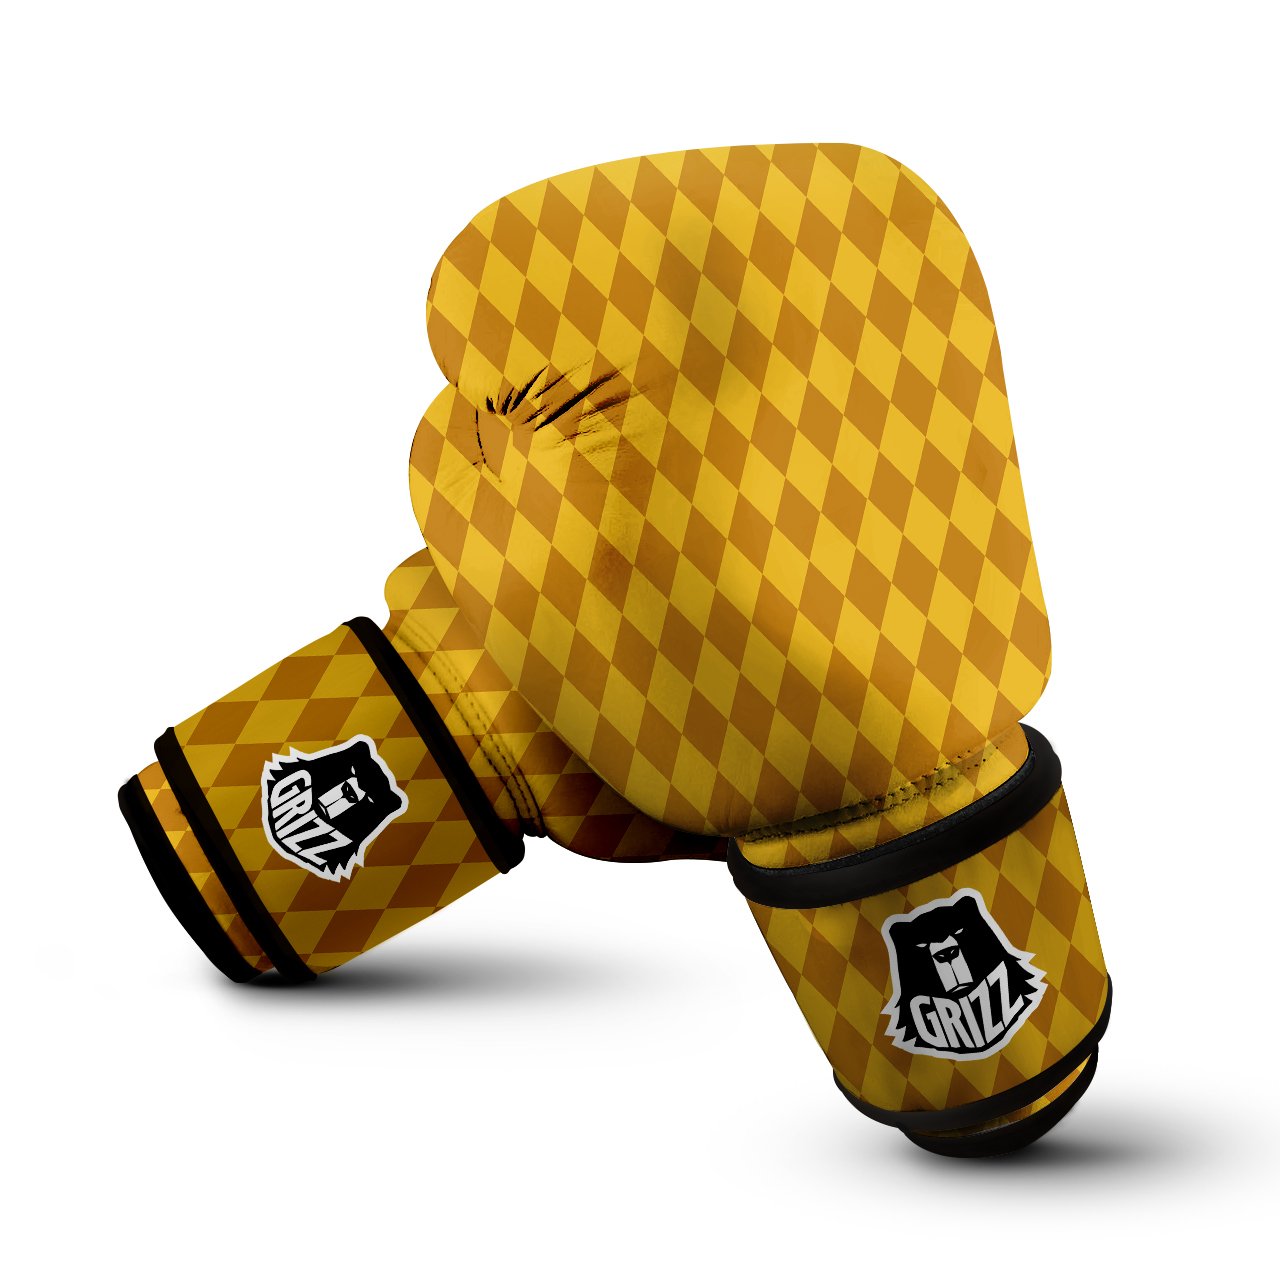 Harlequin Yellow Print Pattern Boxing Gloves-grizzshop